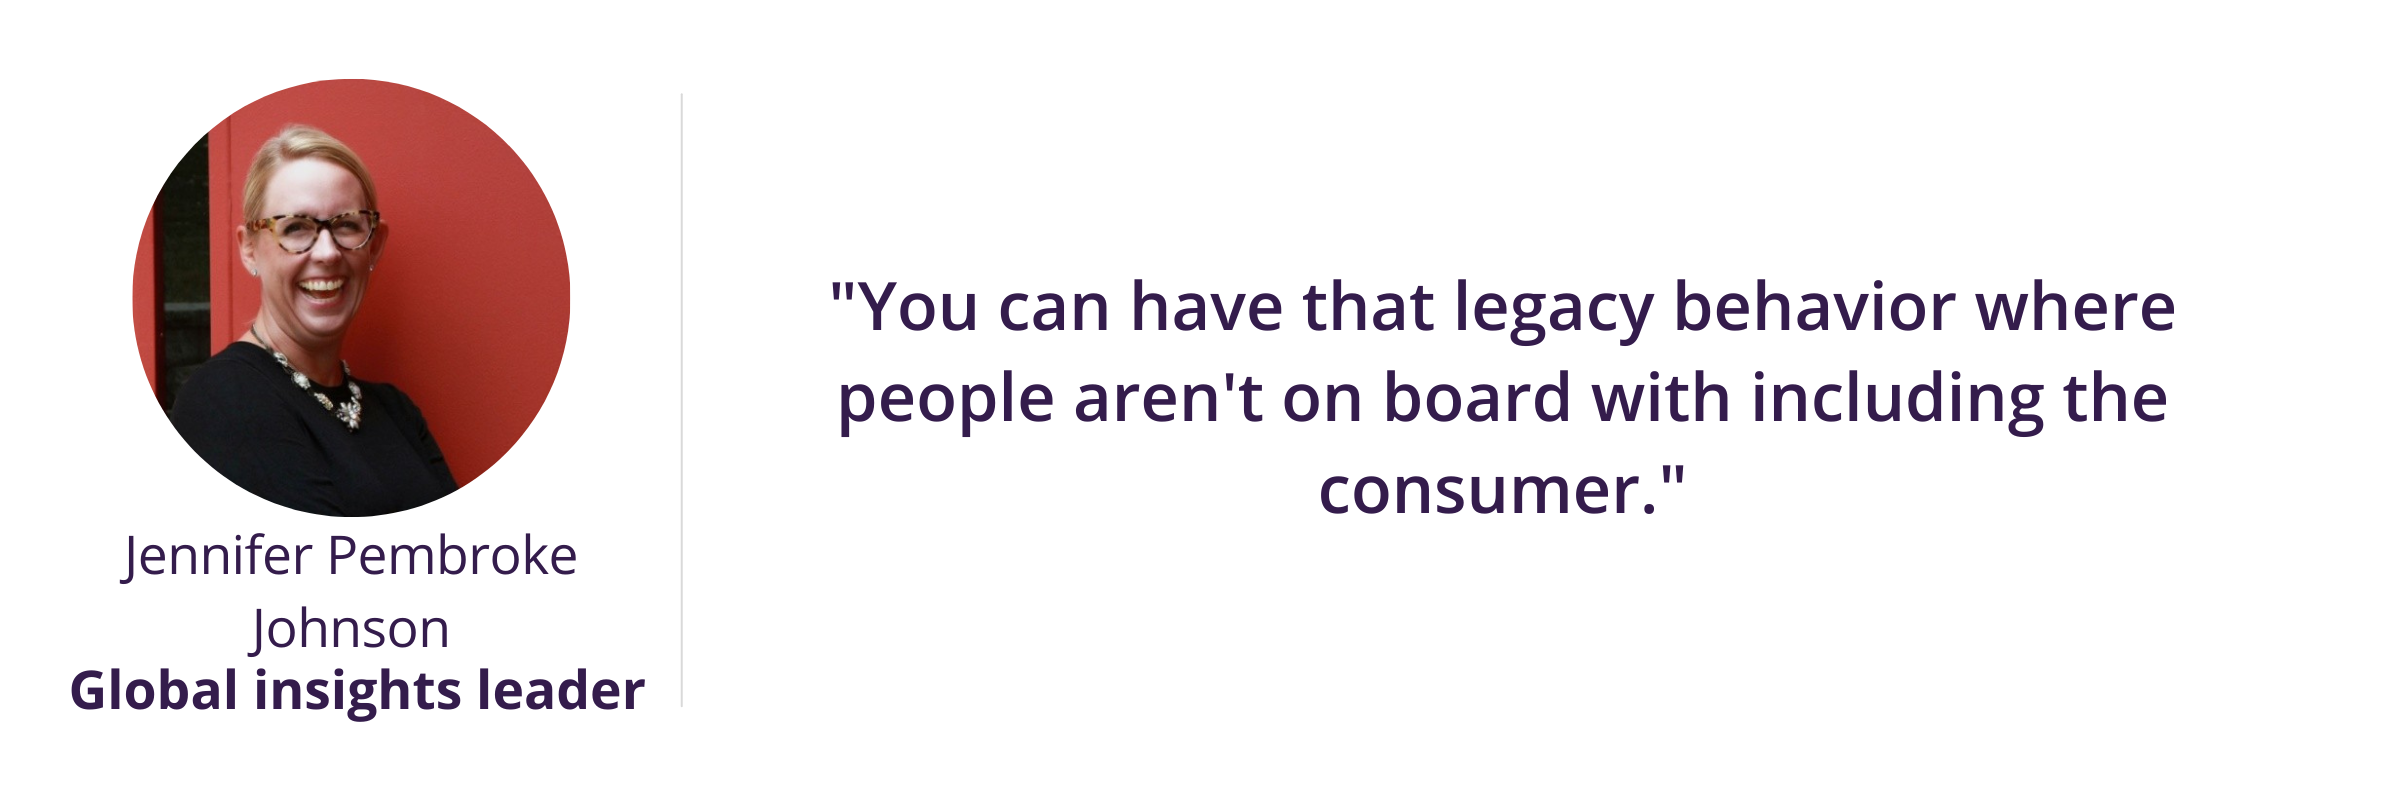 "You can have that legacy behavior where people aren't on board with including the consumer."